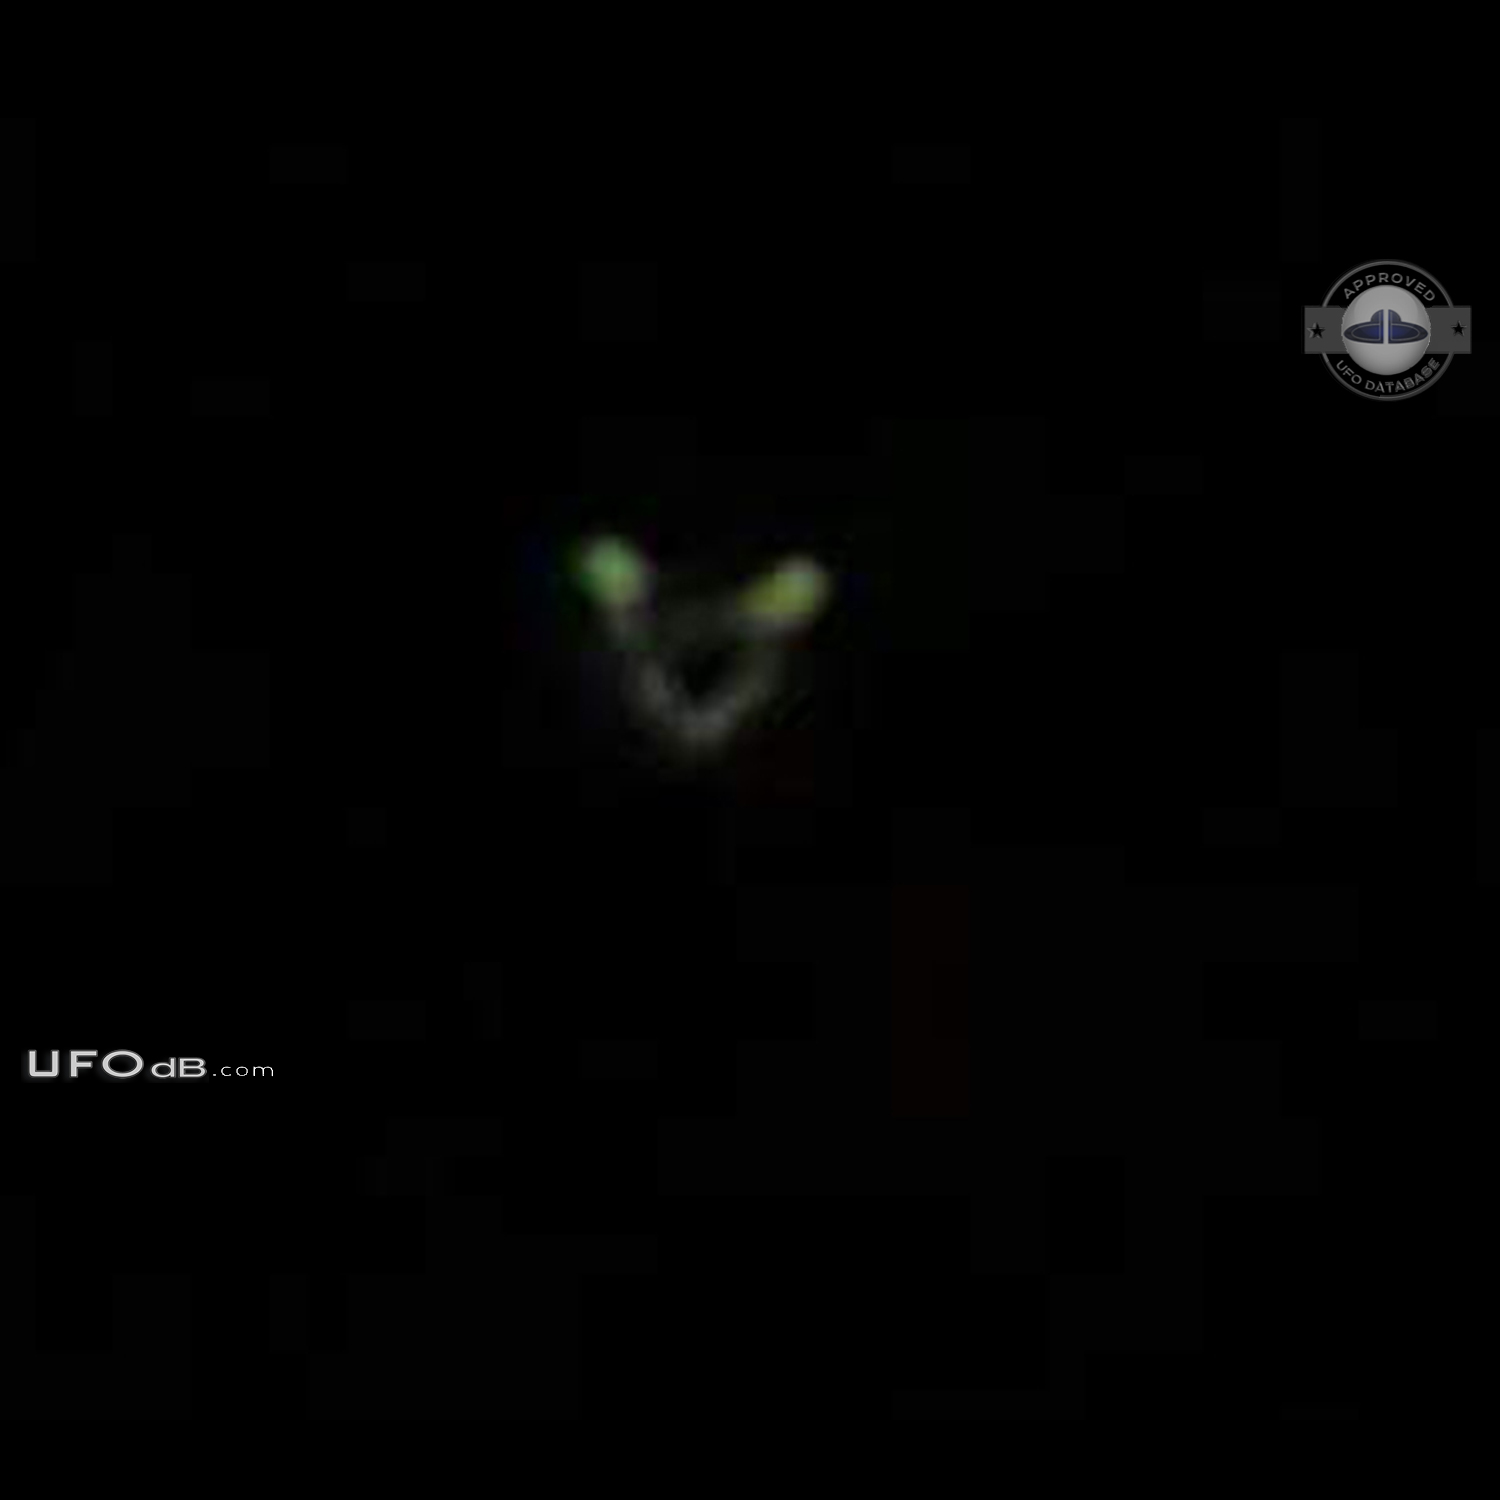 Circular UFO with 2 glowing green lights seen in Huddersfield UK 2011 UFO Picture #688-2